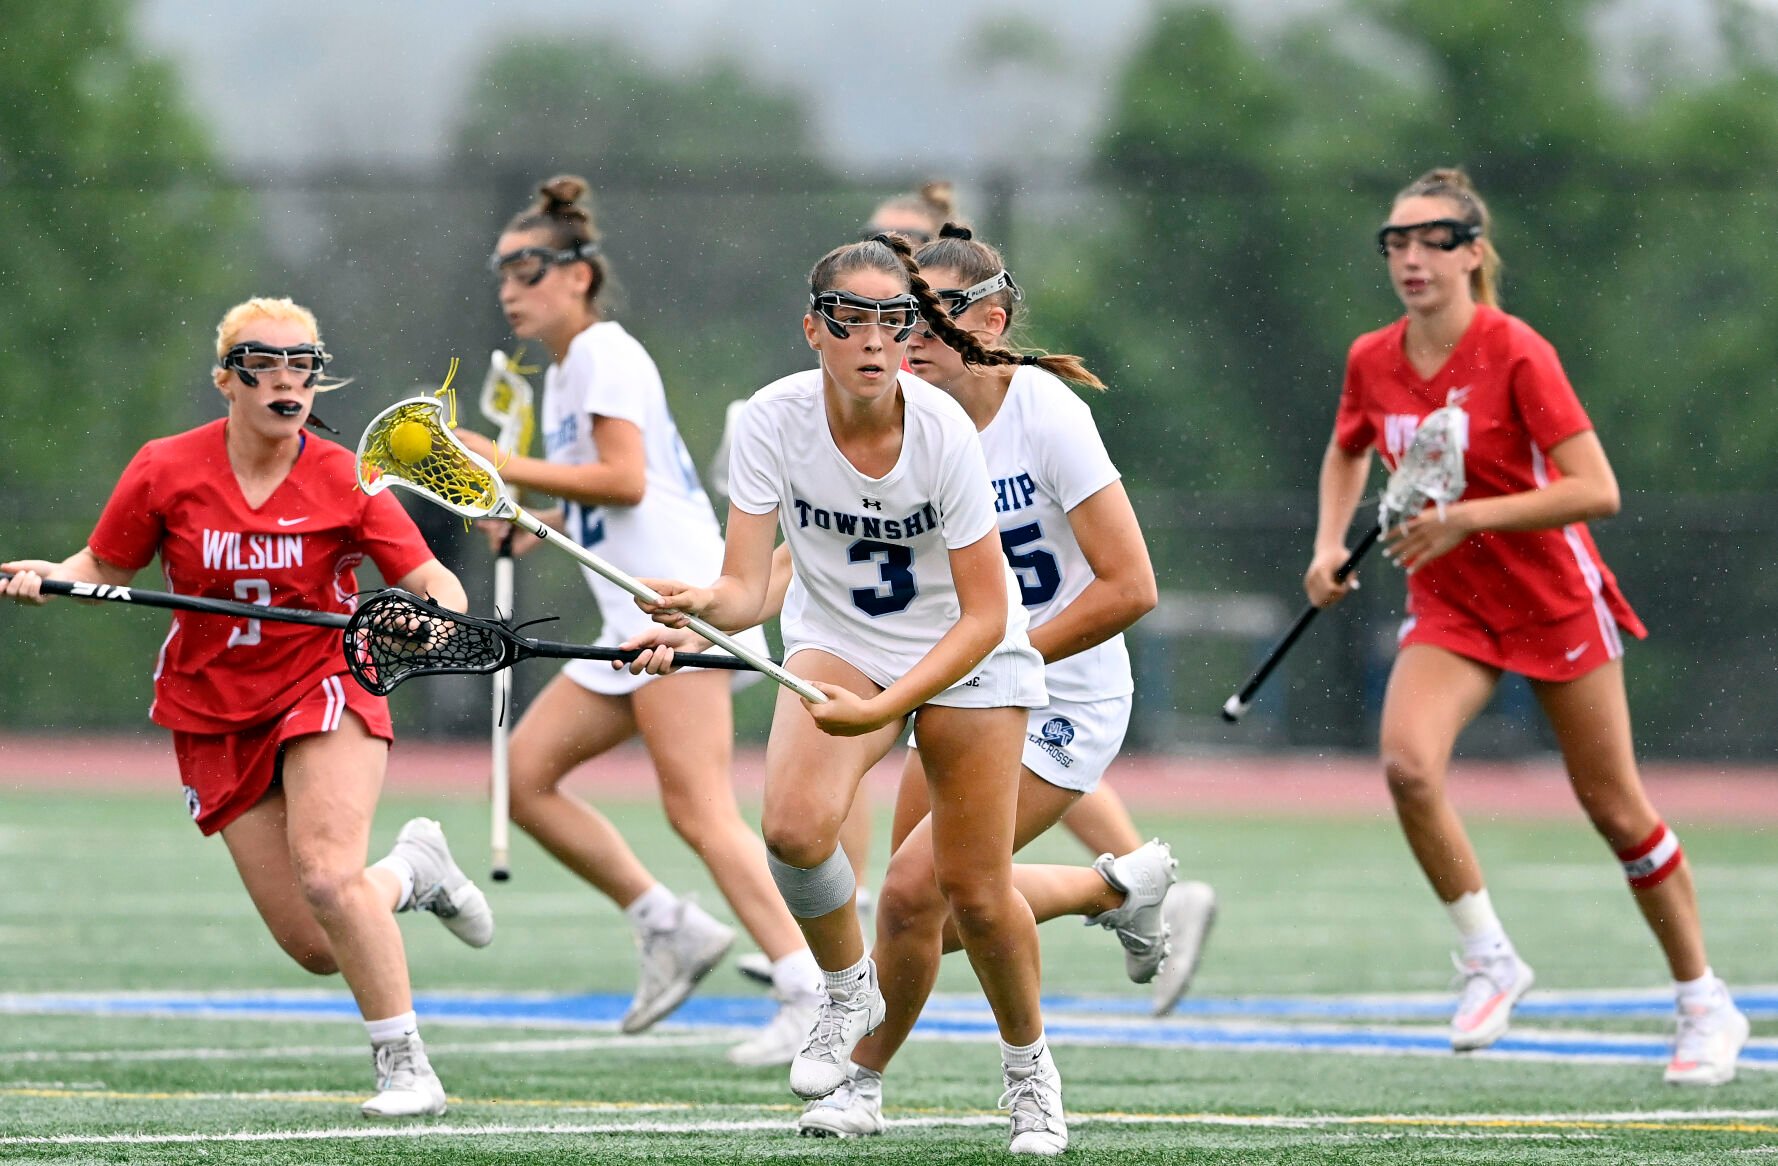 Previewing Saturday's PIAA Class 3A girls lacrosse championship